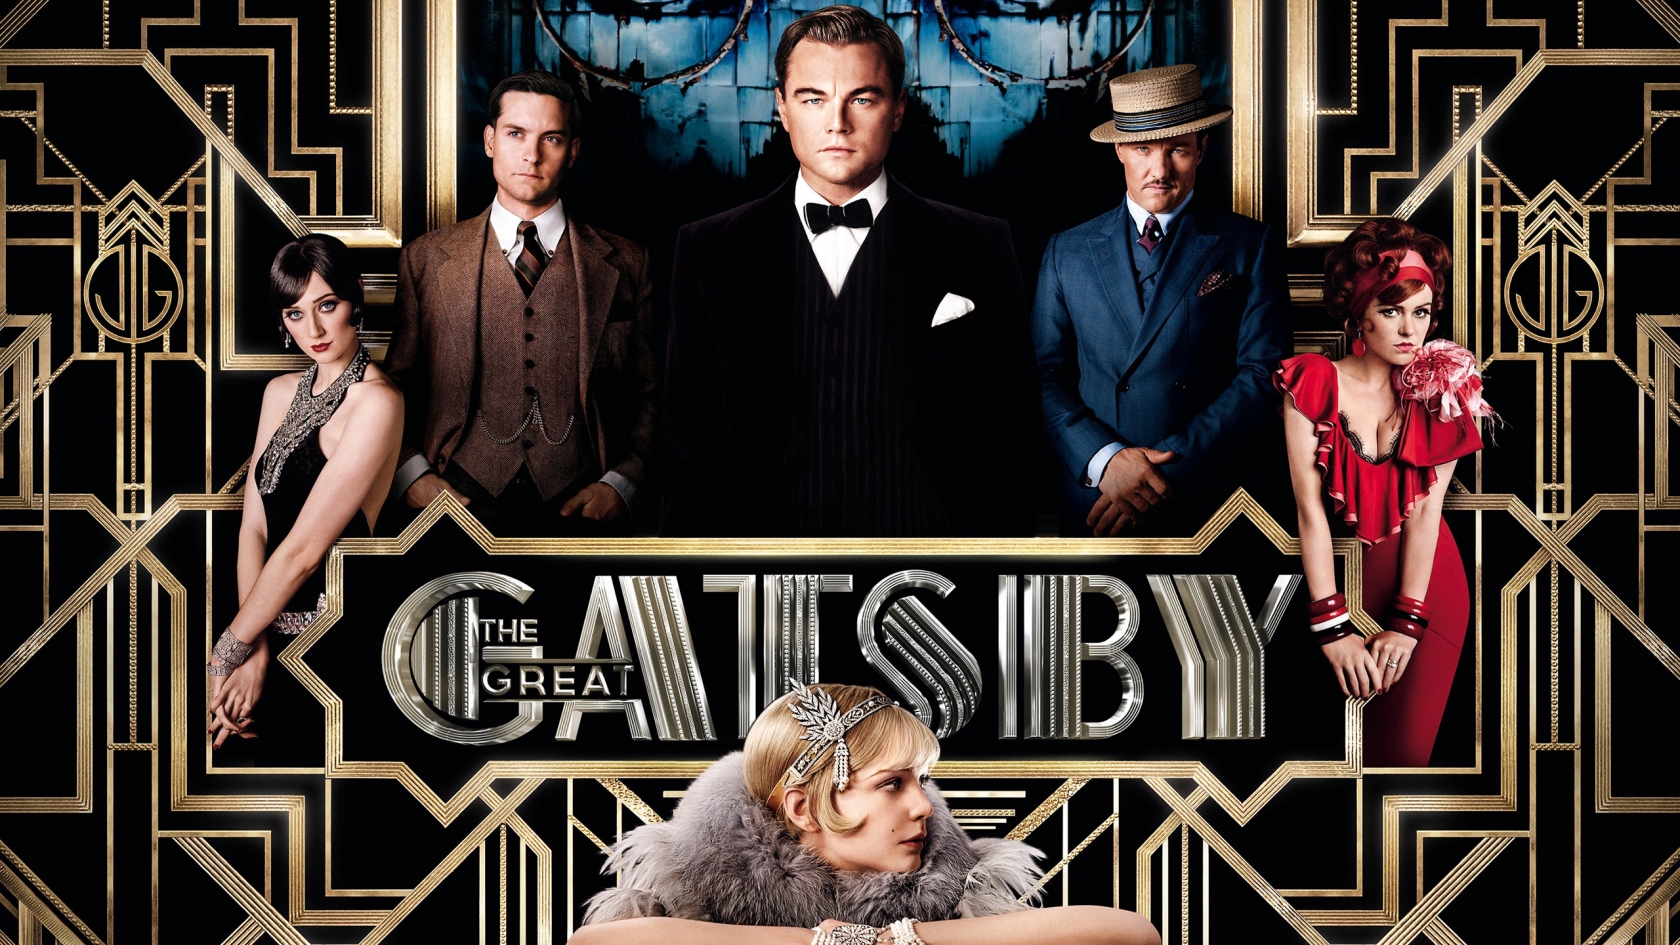 The Great Gatsby Movie for 1680 x 945 HDTV resolution